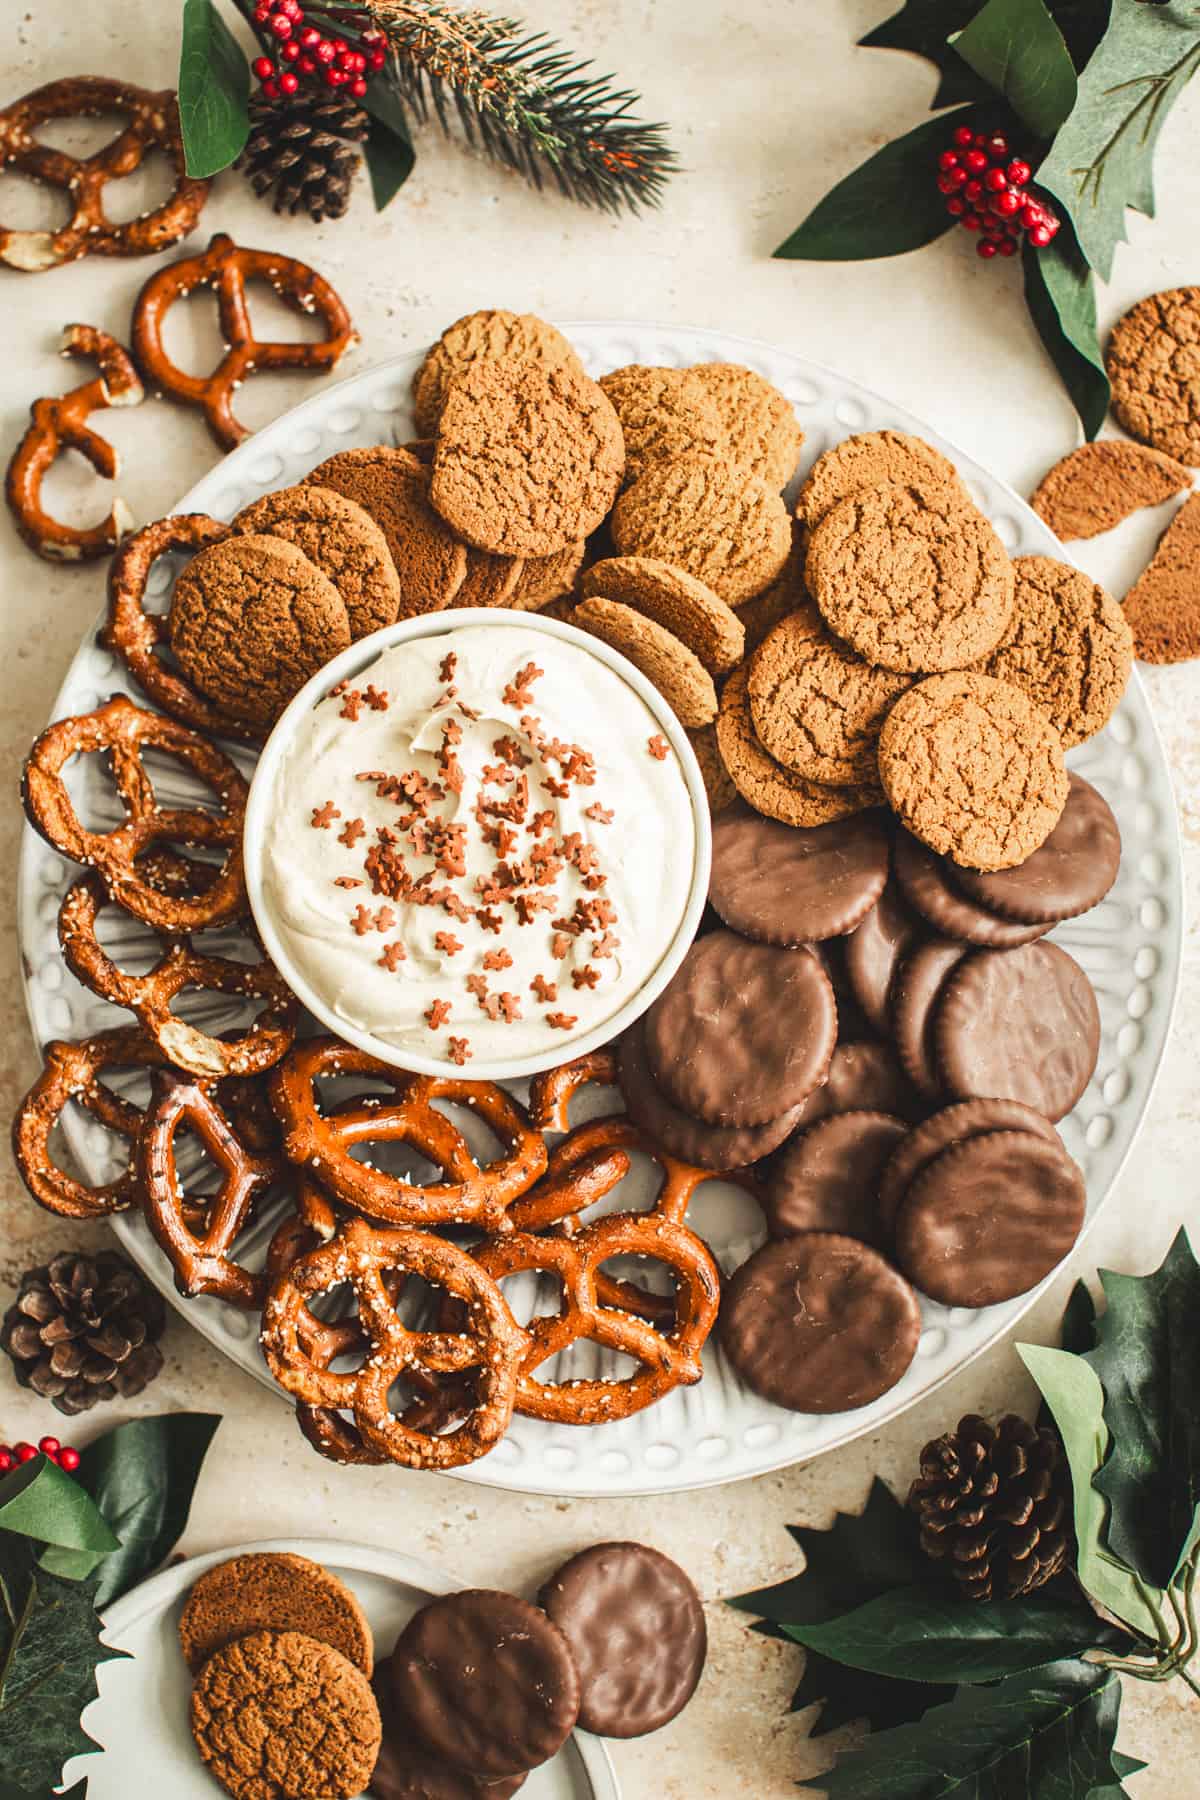 Gingerbread dip topped with candy gingerbread men and on plate with ginger snaps, pretzels, and chocolate crackers.